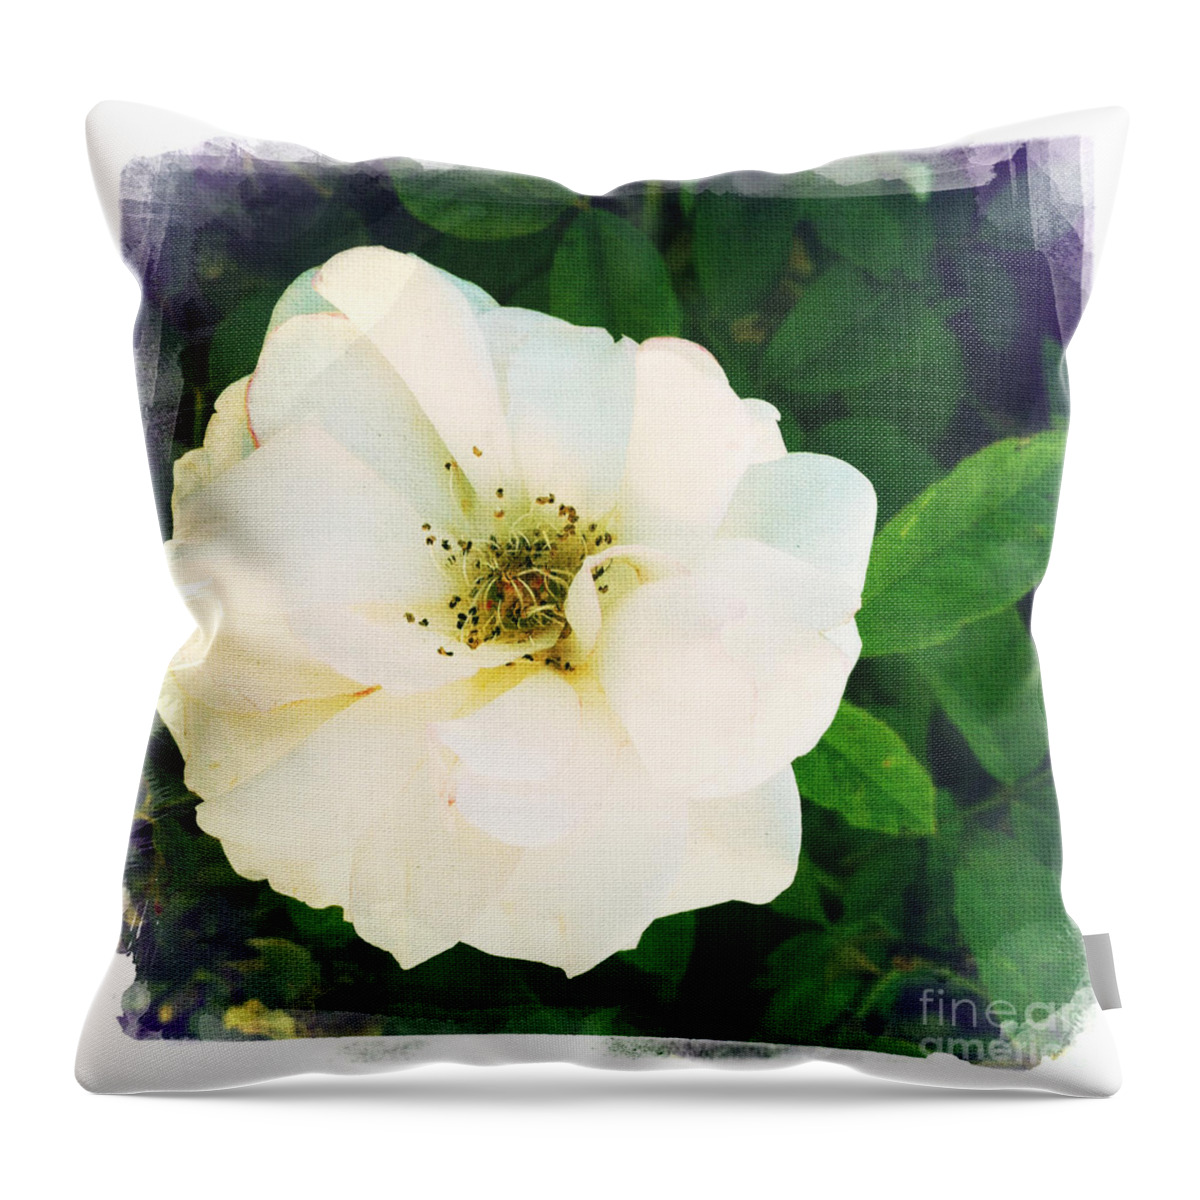 Rose Throw Pillow featuring the photograph Rose by Nina Prommer